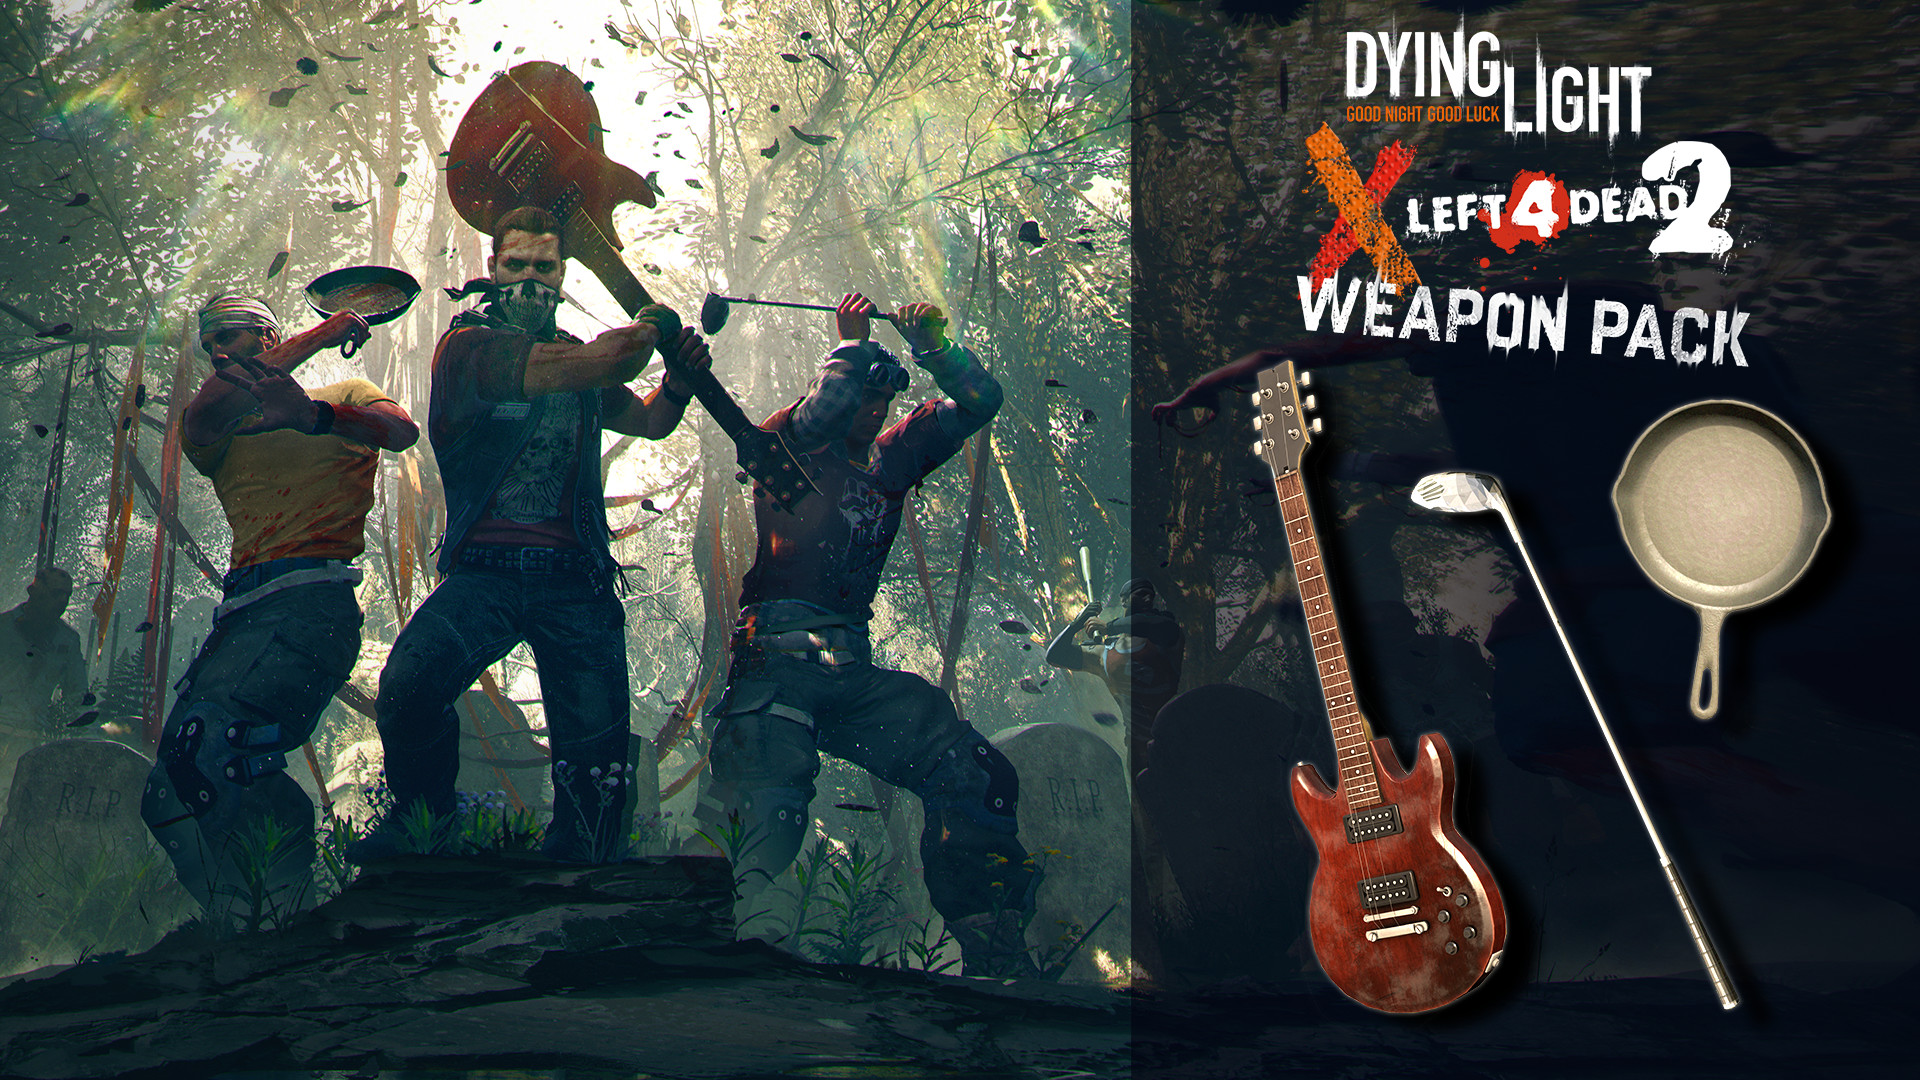 Dying Light - Left 4 Dead 2 Weapon Pack Featured Screenshot #1